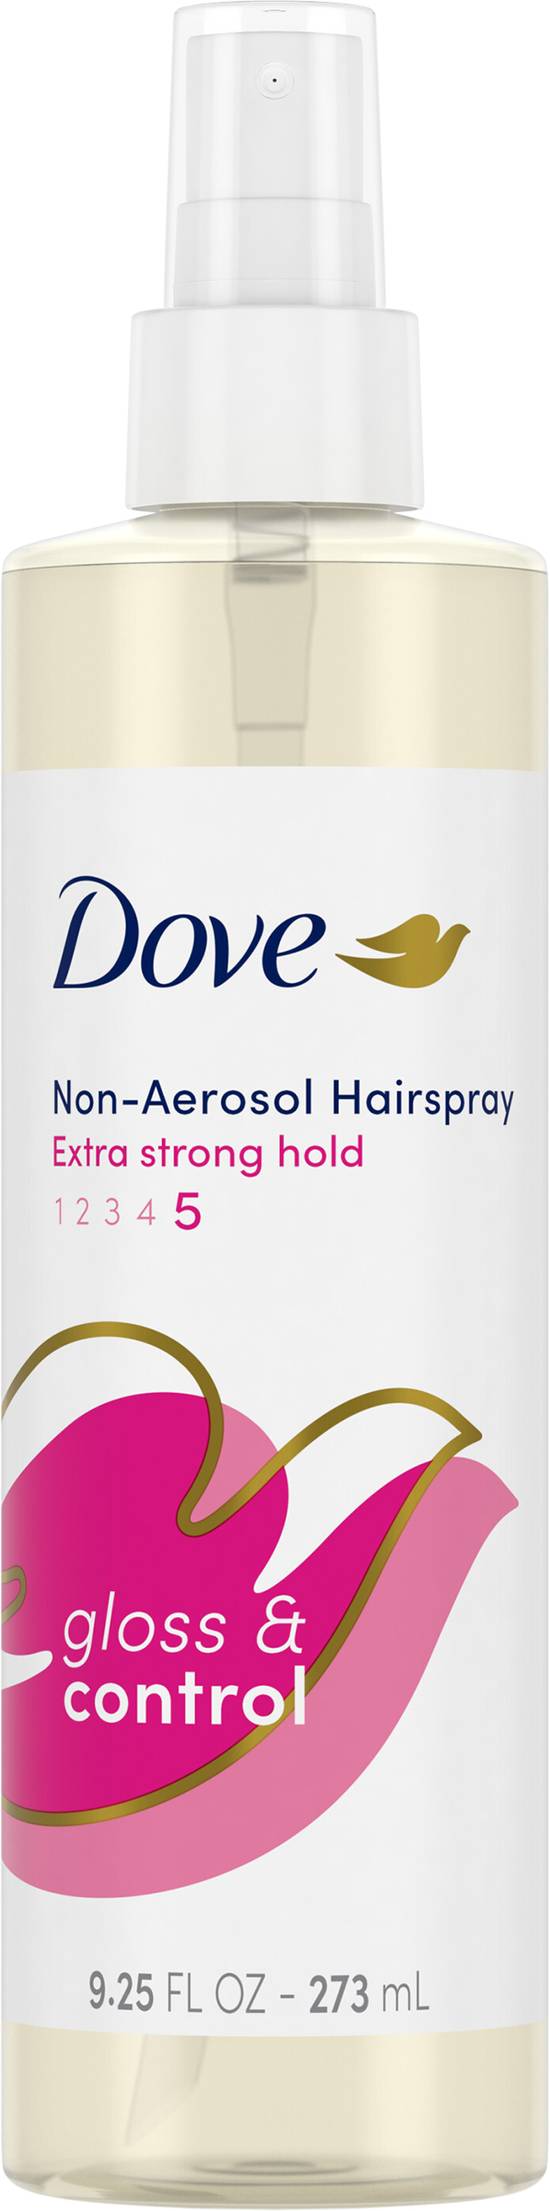 Dove Style + Care Extra Hold Hairspray